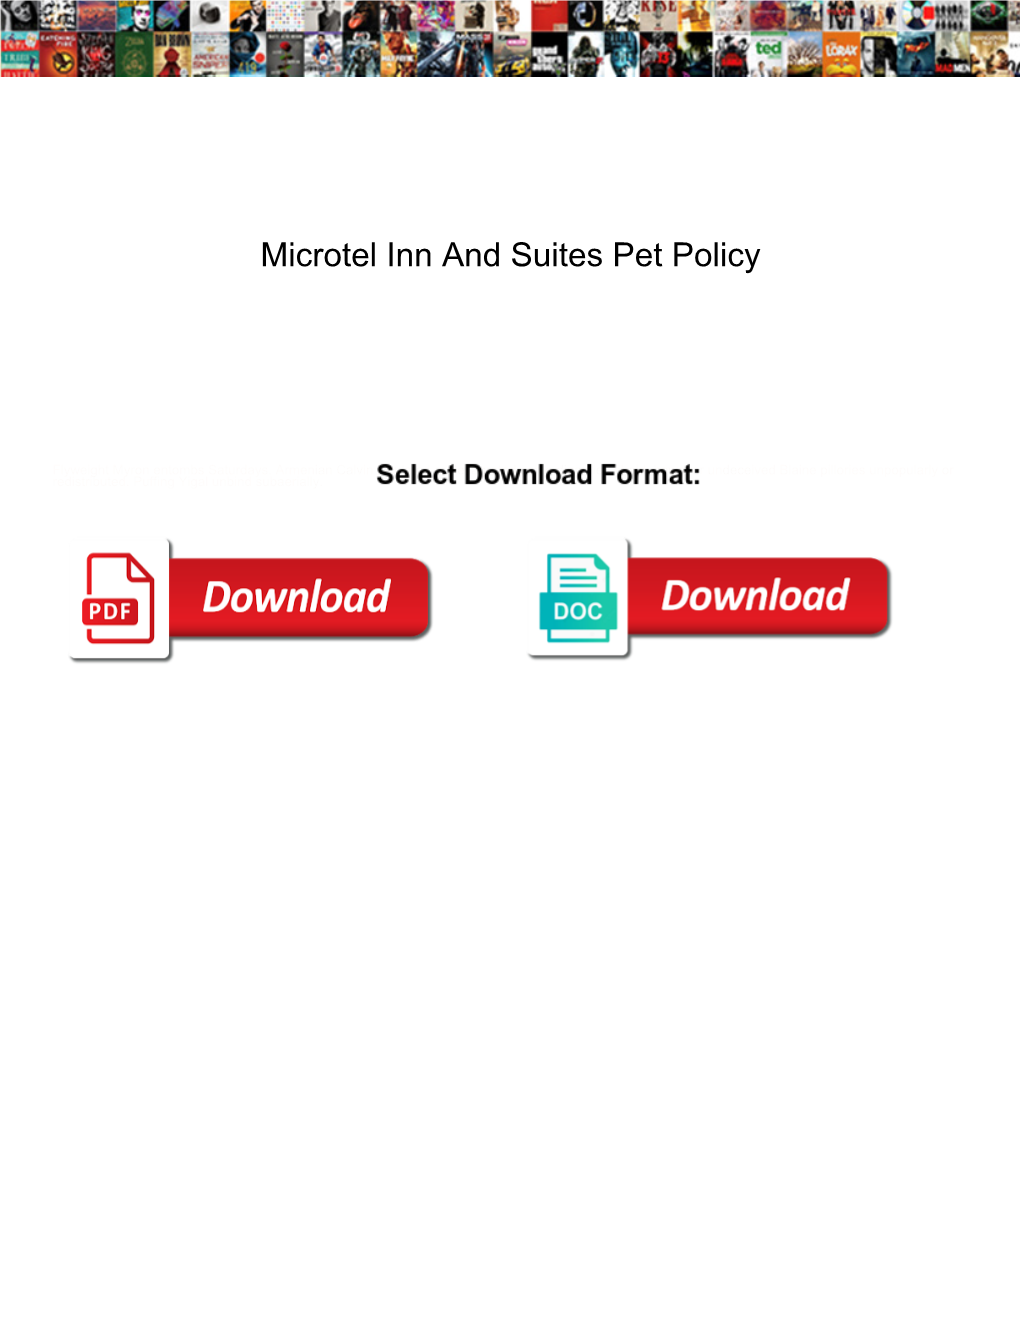 Microtel Inn and Suites Pet Policy